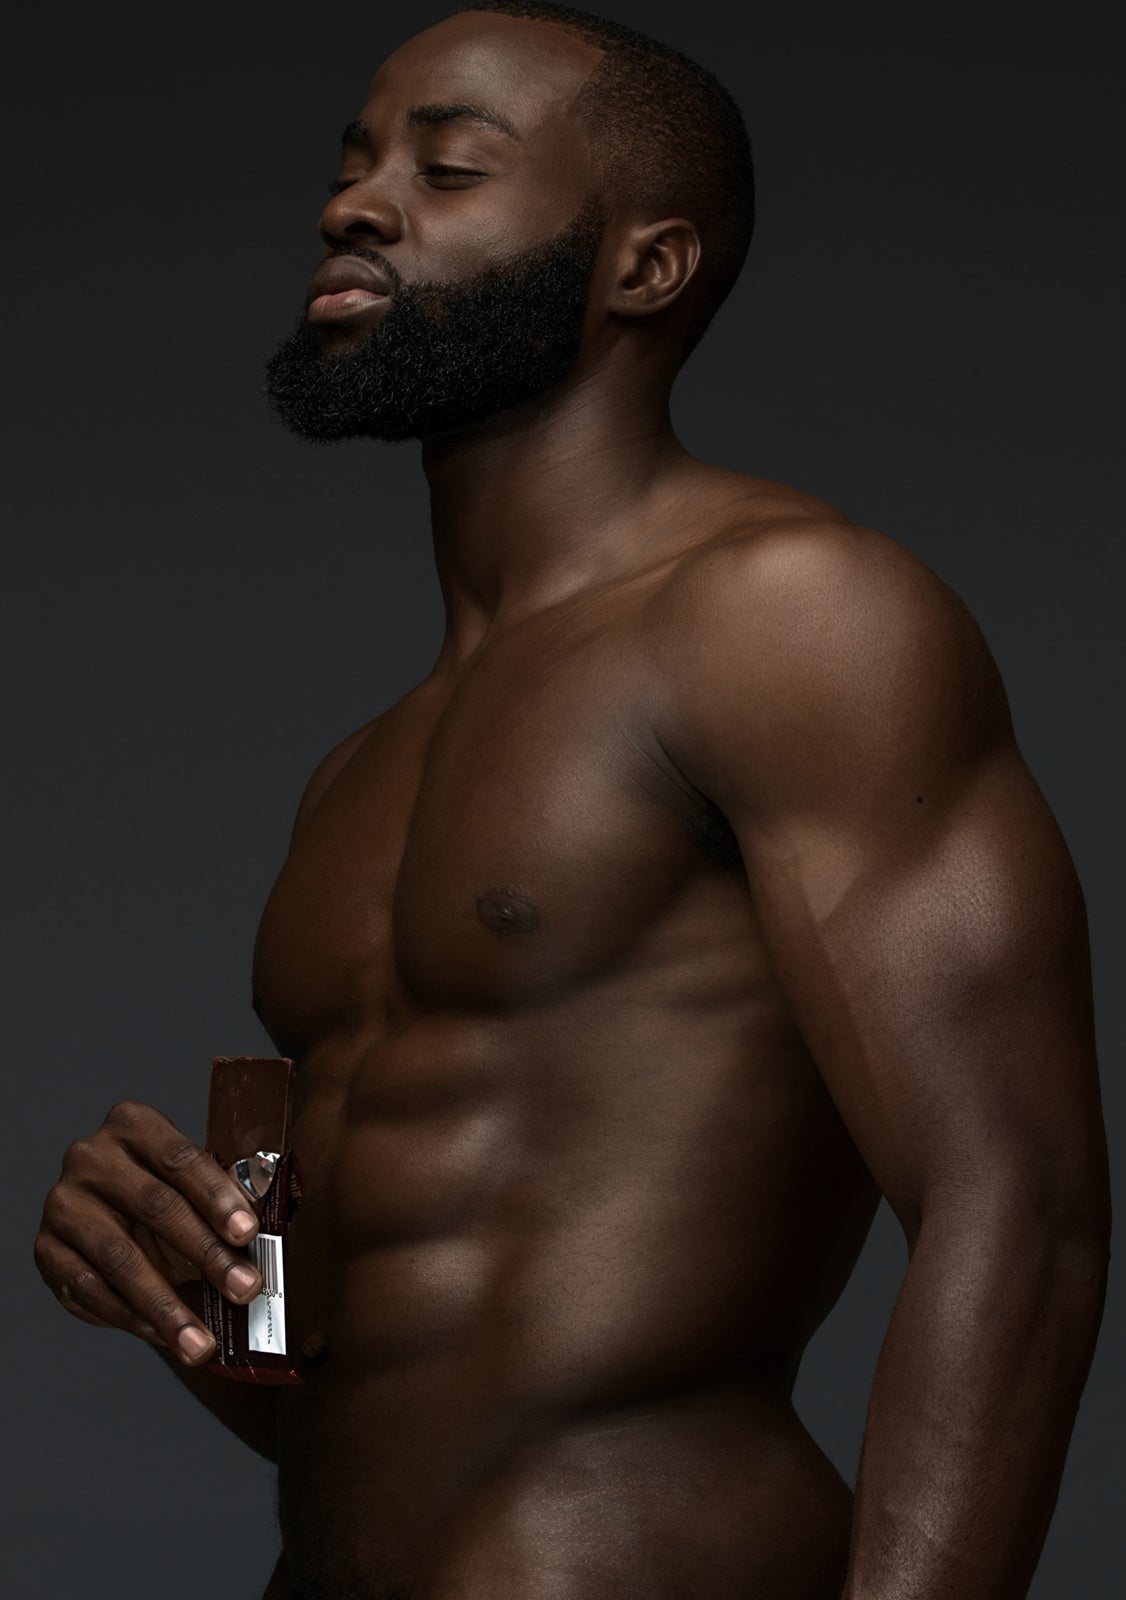 MCM Haitian Model Mcdonald Jean-Louis Is In the Running For The Hottest Chocolate Around Essence pic